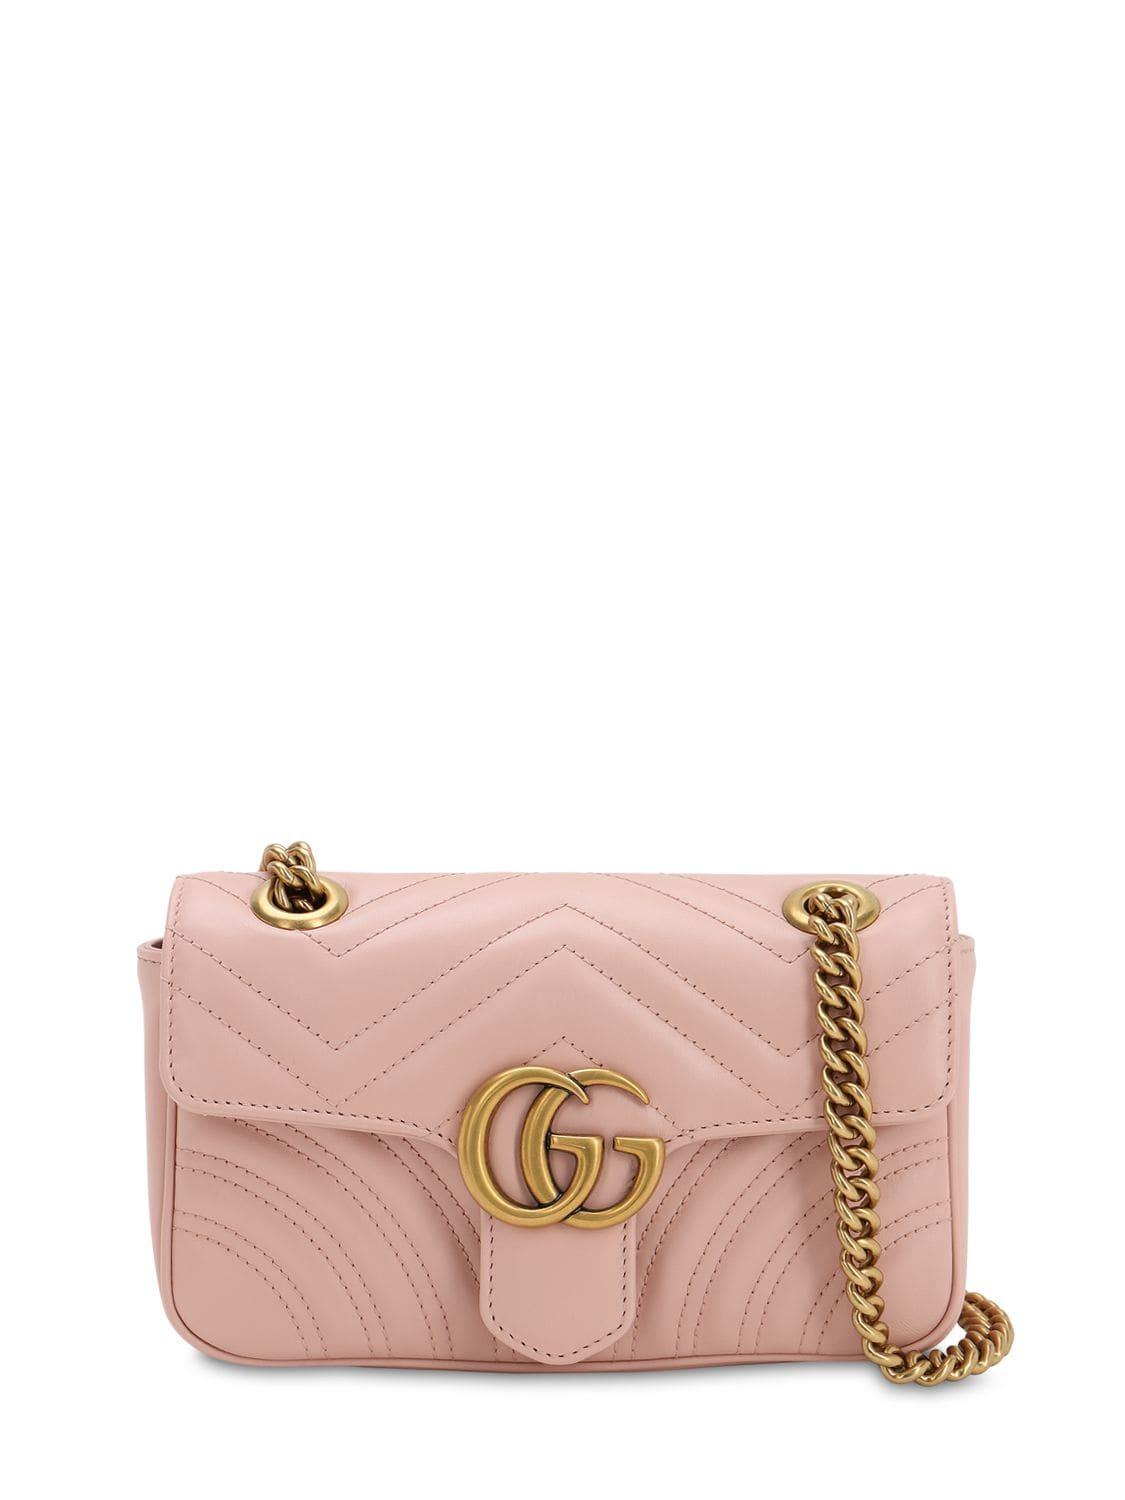 Gucci Mini Gg Marmont 2.0 Leather Shoulder Bag in Pink - Lyst